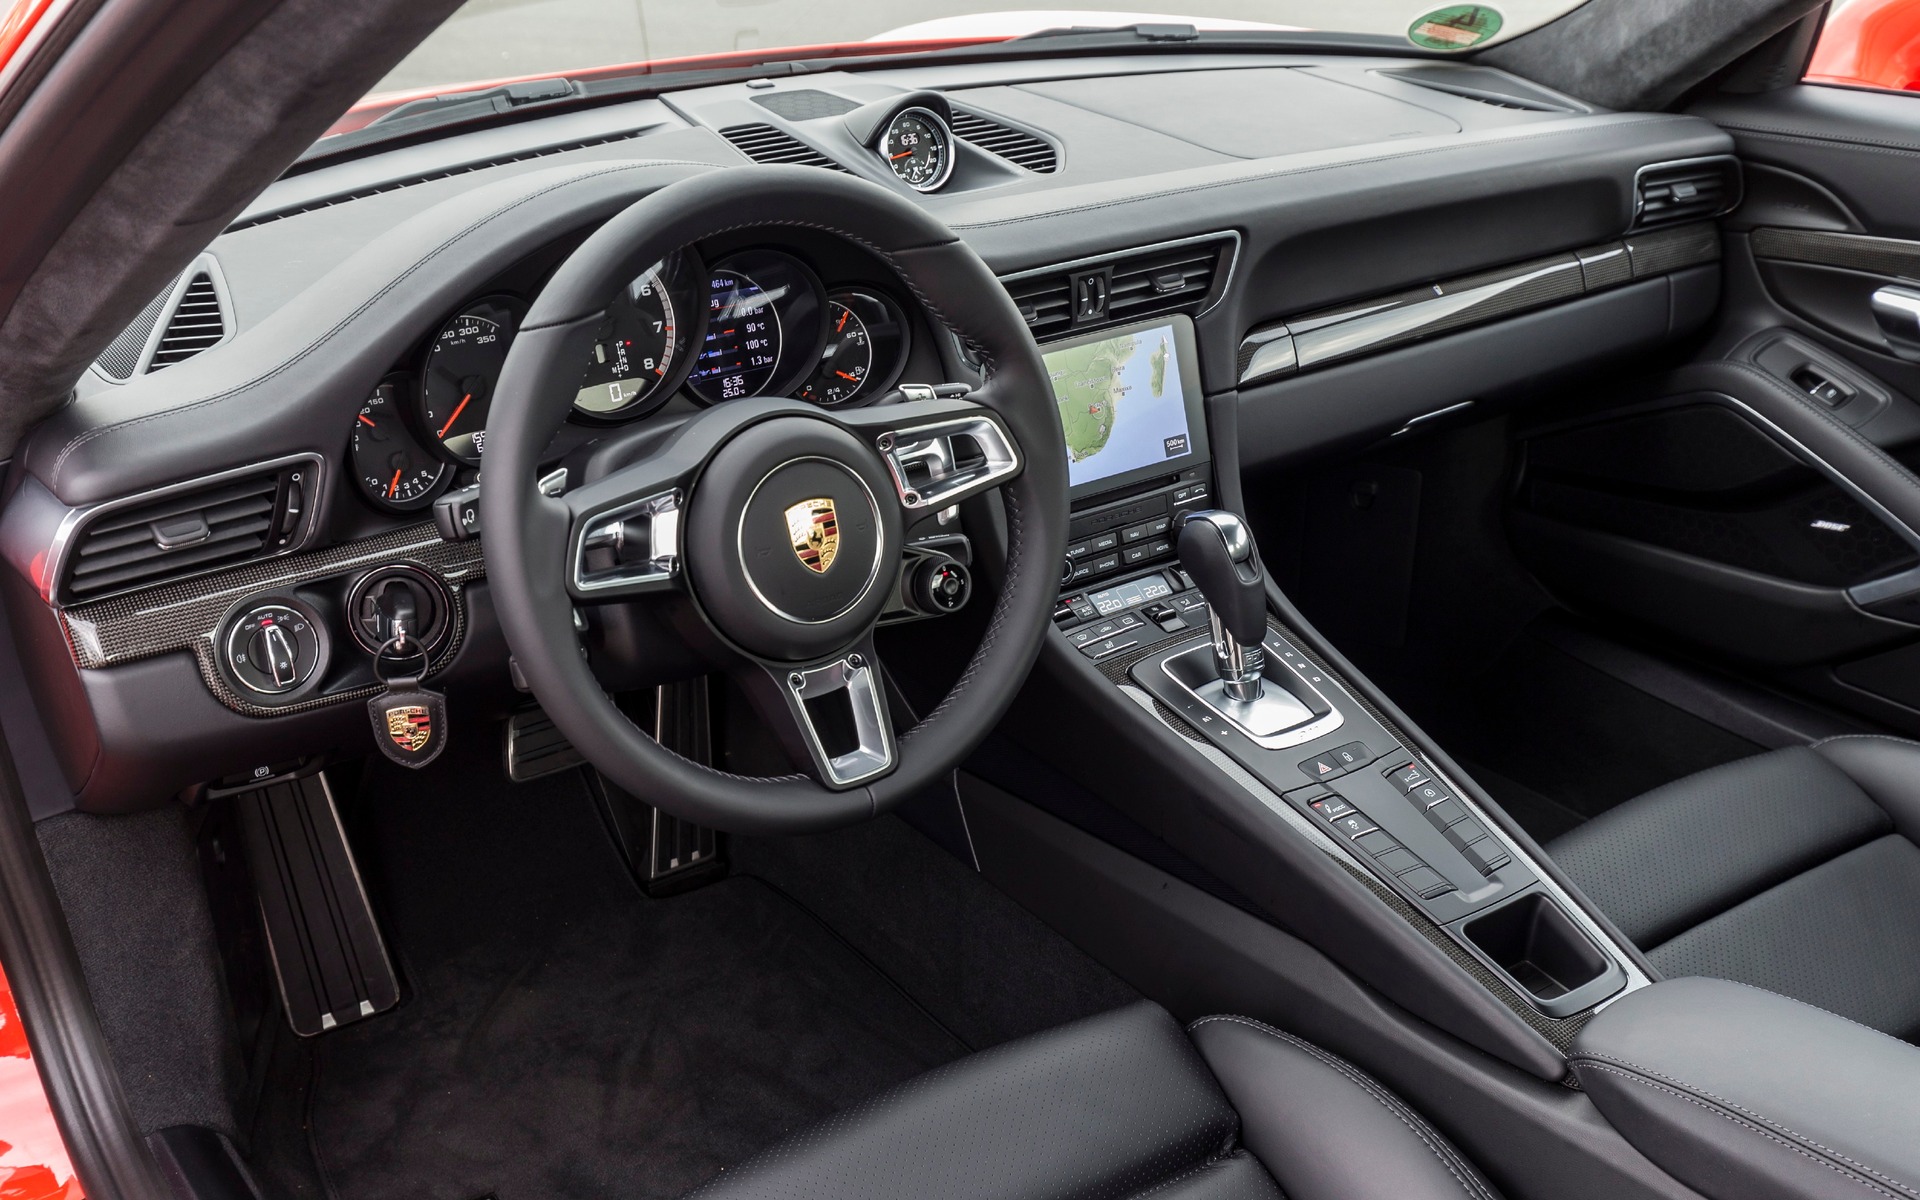 The 2017 Porsche 911 Turbo S' cockpit - functional and well finished